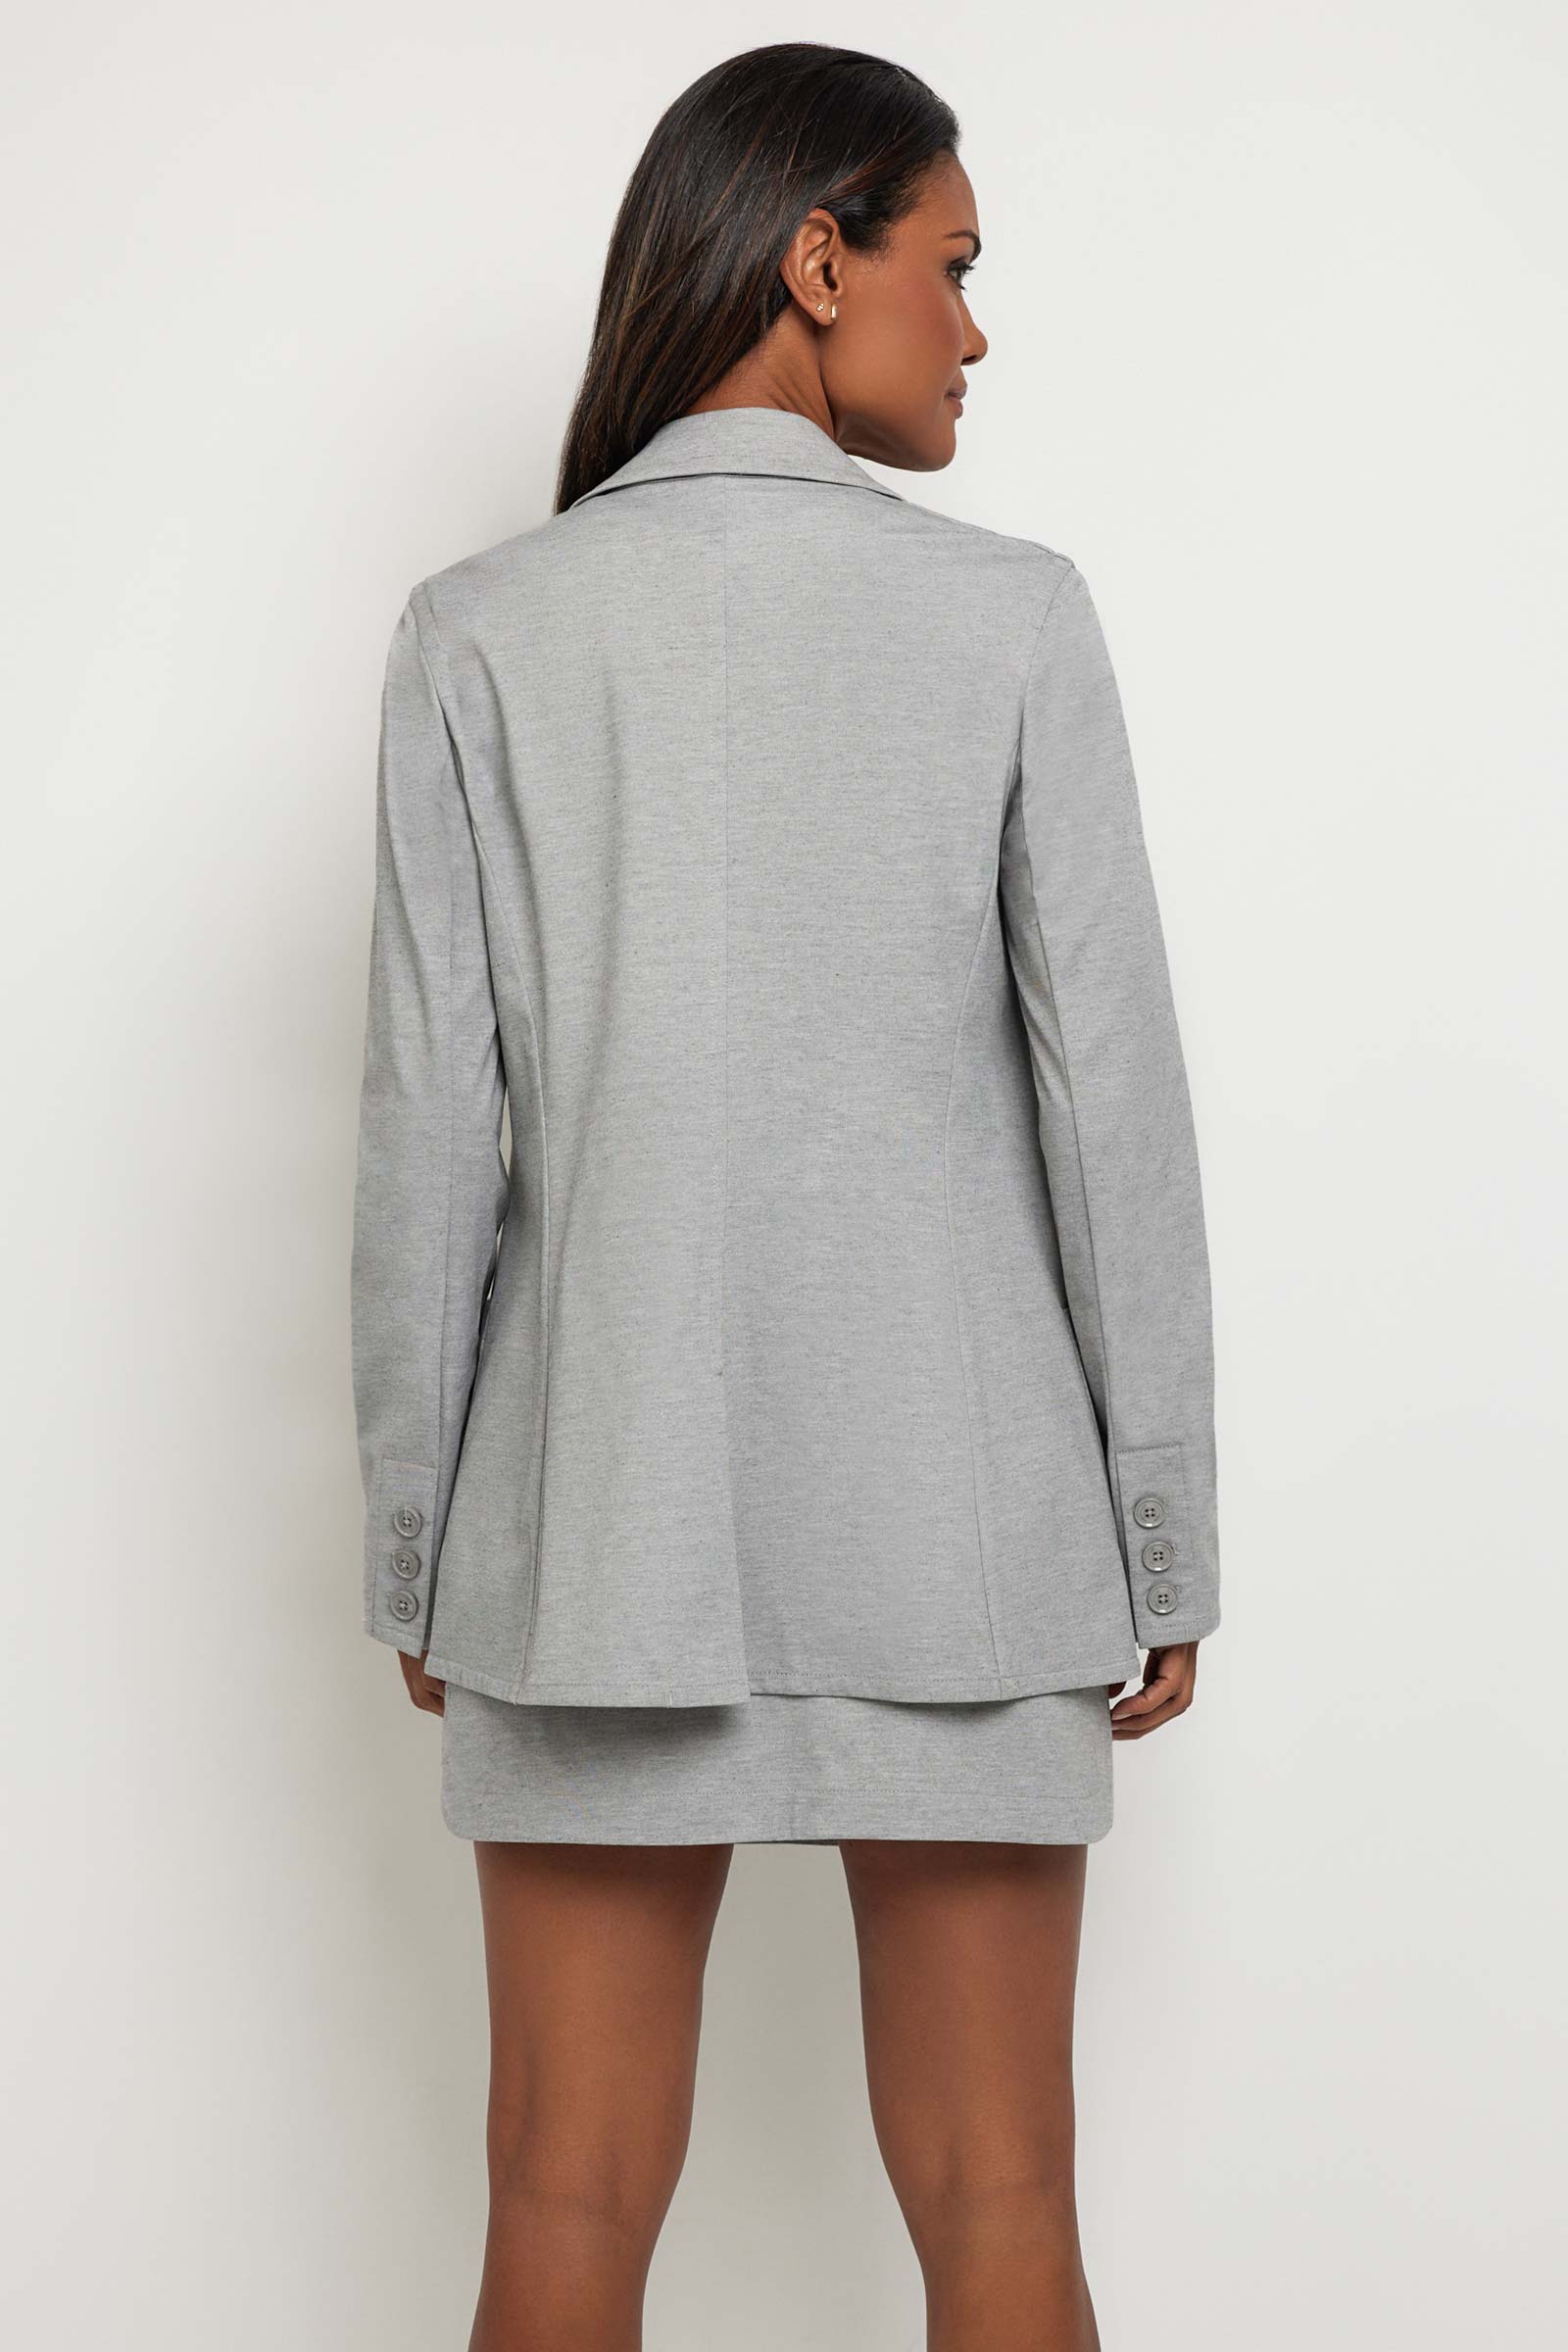 The Best Travel Jacket. Woman Showing the Back Profile of a Vanessa Blazer in Light Heather Grey.